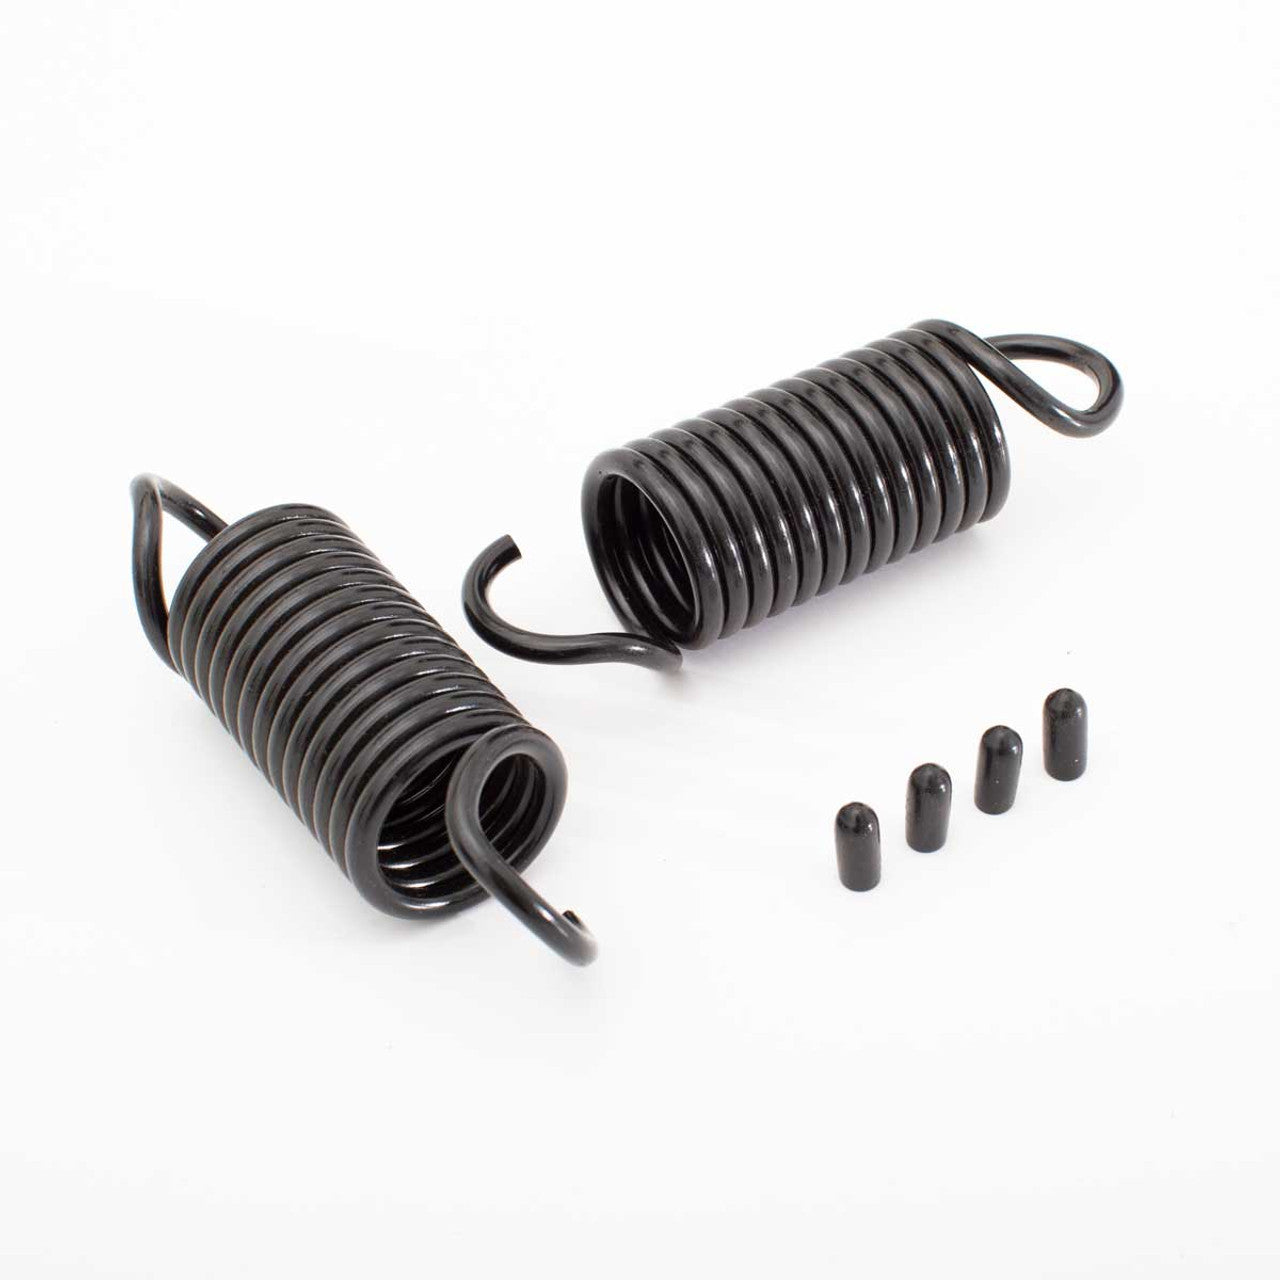 Springs for 2XL Big Green Egg (Set of 2) 116833